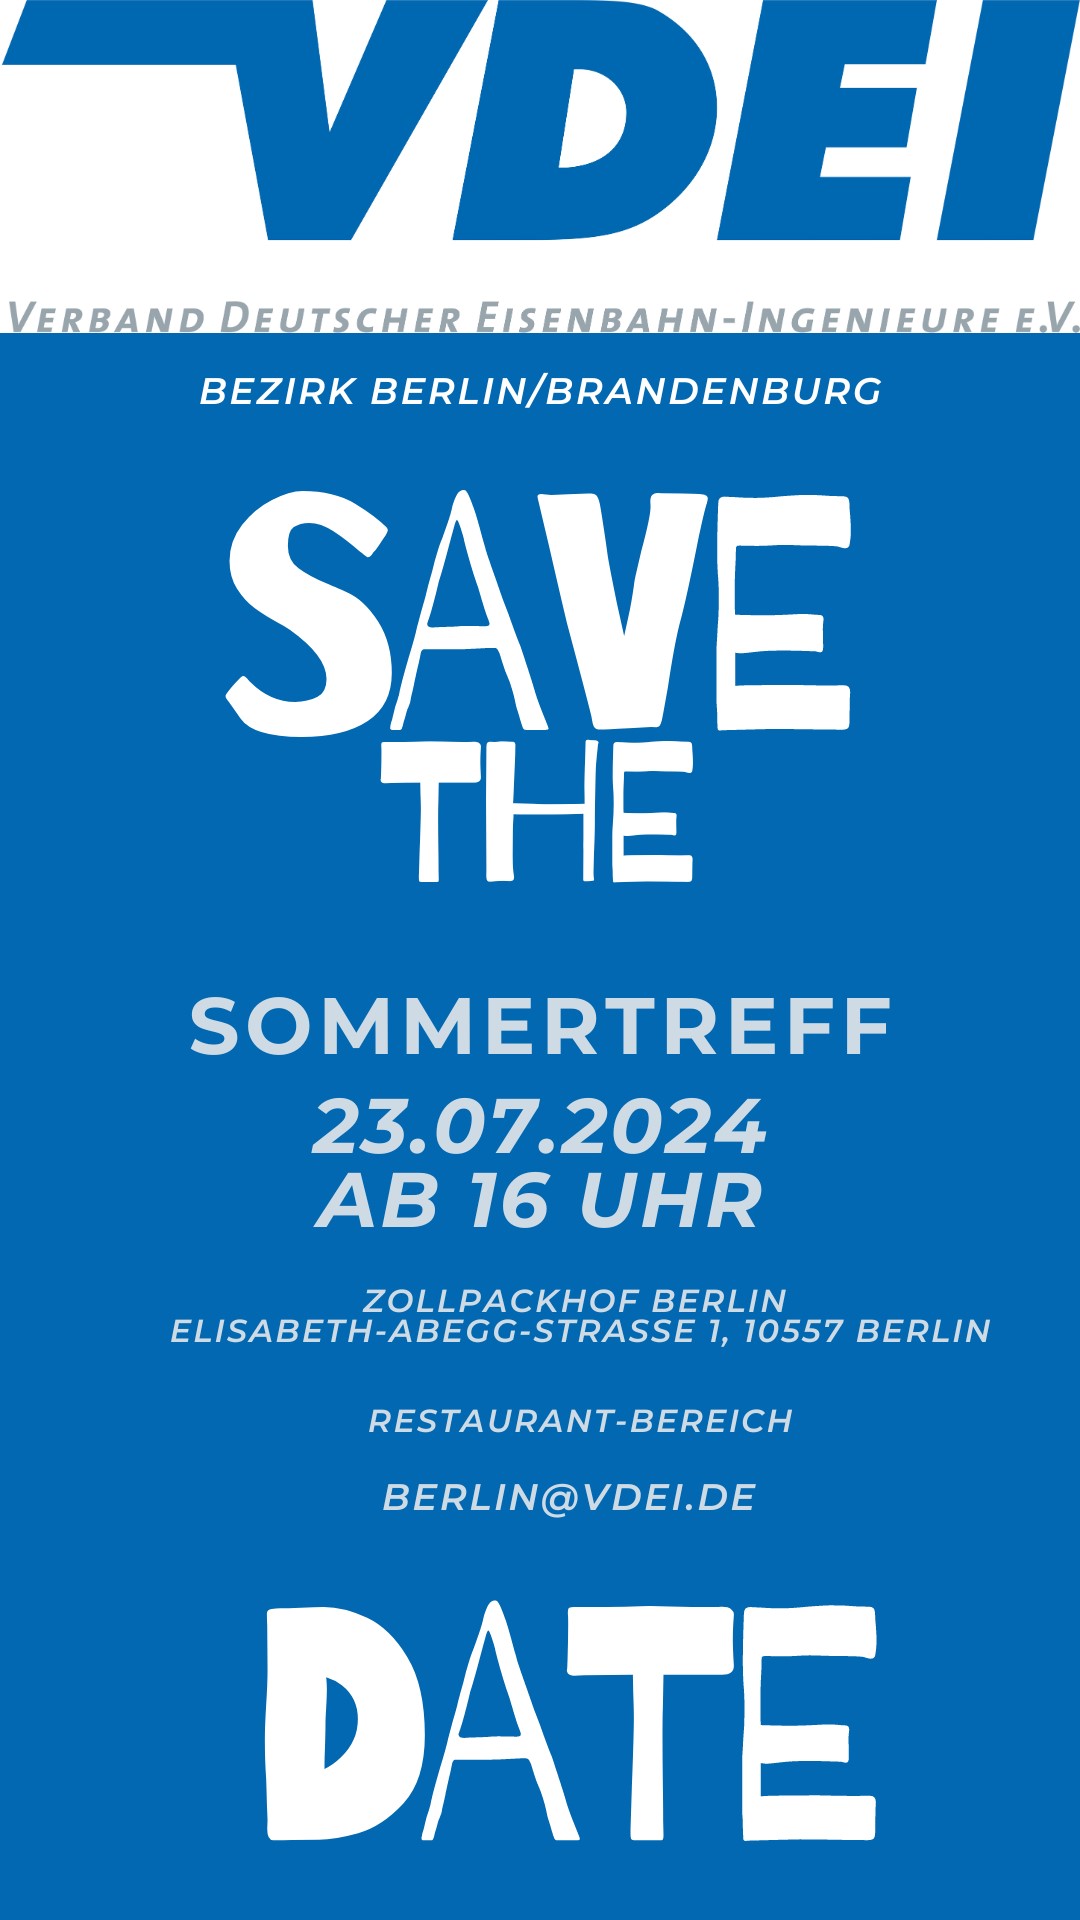 save the date Sommerfest am 23.07.2024 in Berlin Mitte